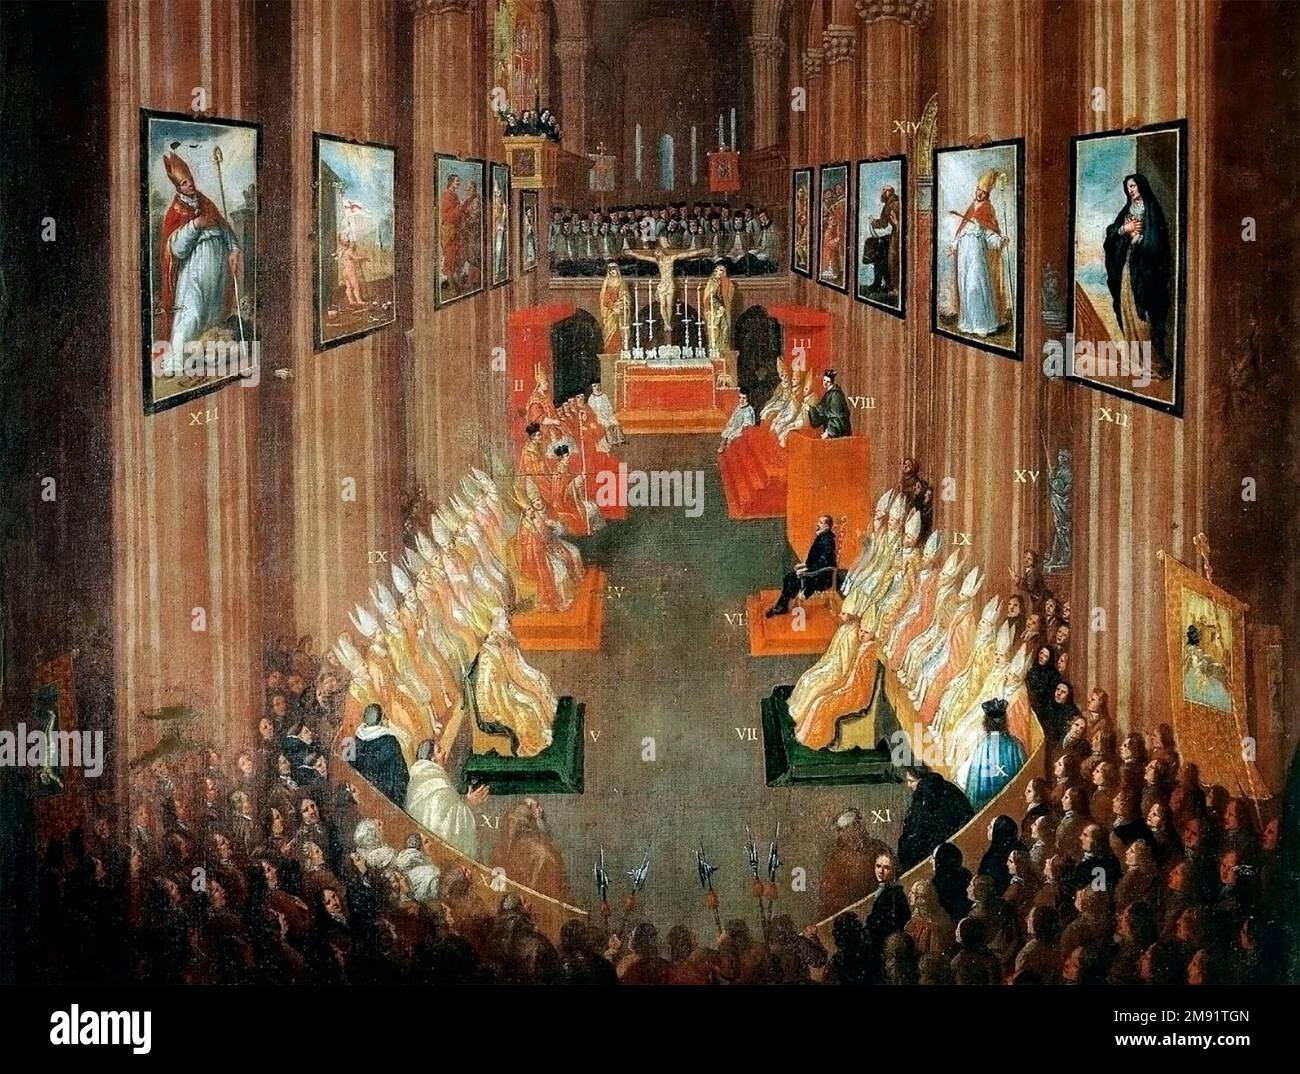 Council of Trent. Painting of the The Council of Trent (Concilium Tridentinum), held between 1545 and 1563 in Trent (Trento). It was the 19th ecumenical council of the Catholic Church, prompted by the Protestant Reformation, and has been described as the embodiment of the Counter-Reformation. Painting by Nicolò Dorigati, 1711 Stock Photo